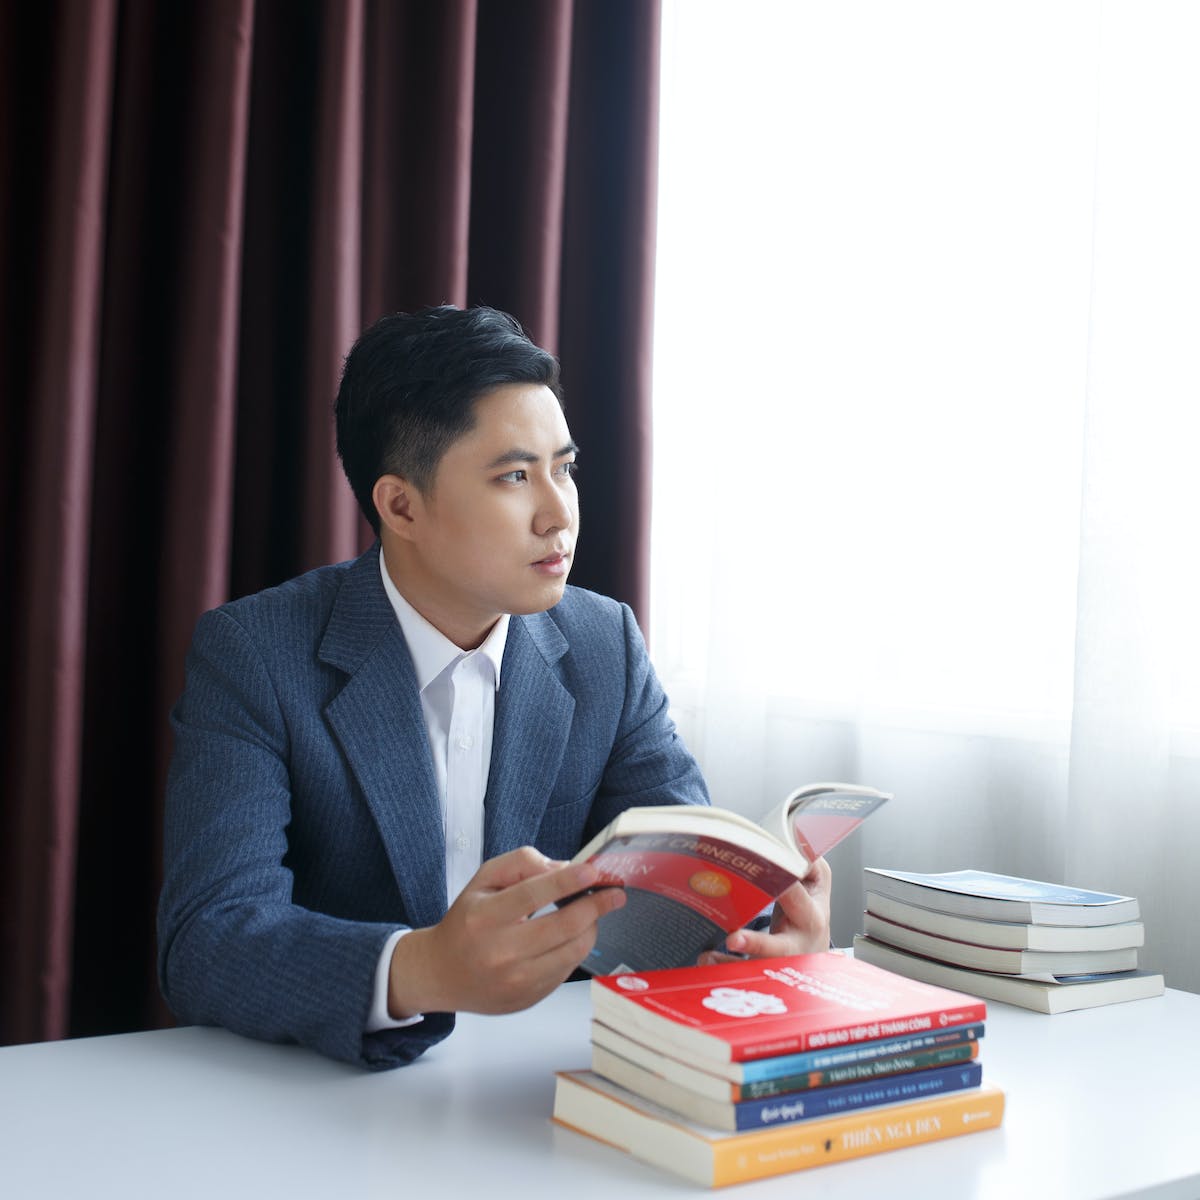 Pensive young man in a suit sitting at a table with books